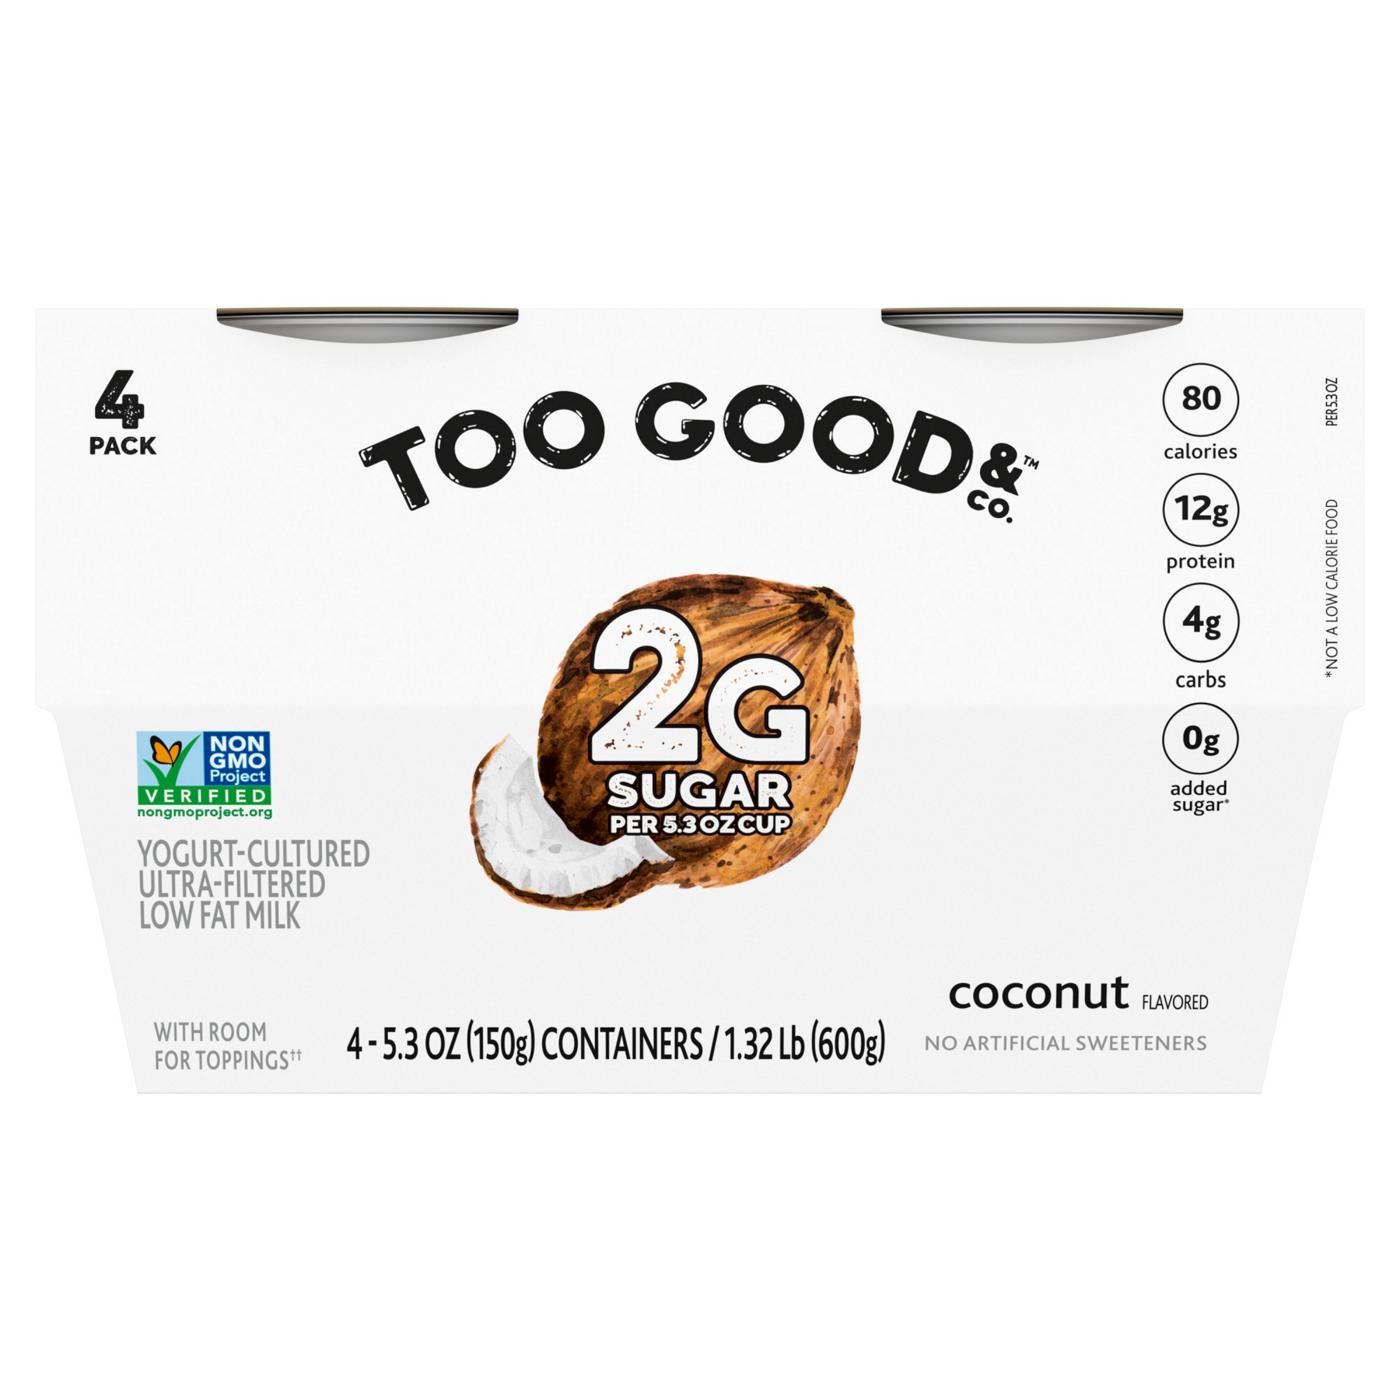 Too Good & Co. Coconut Flavored Lower Sugar, Low Fat Greek Yogurt Cultured Product; image 1 of 2